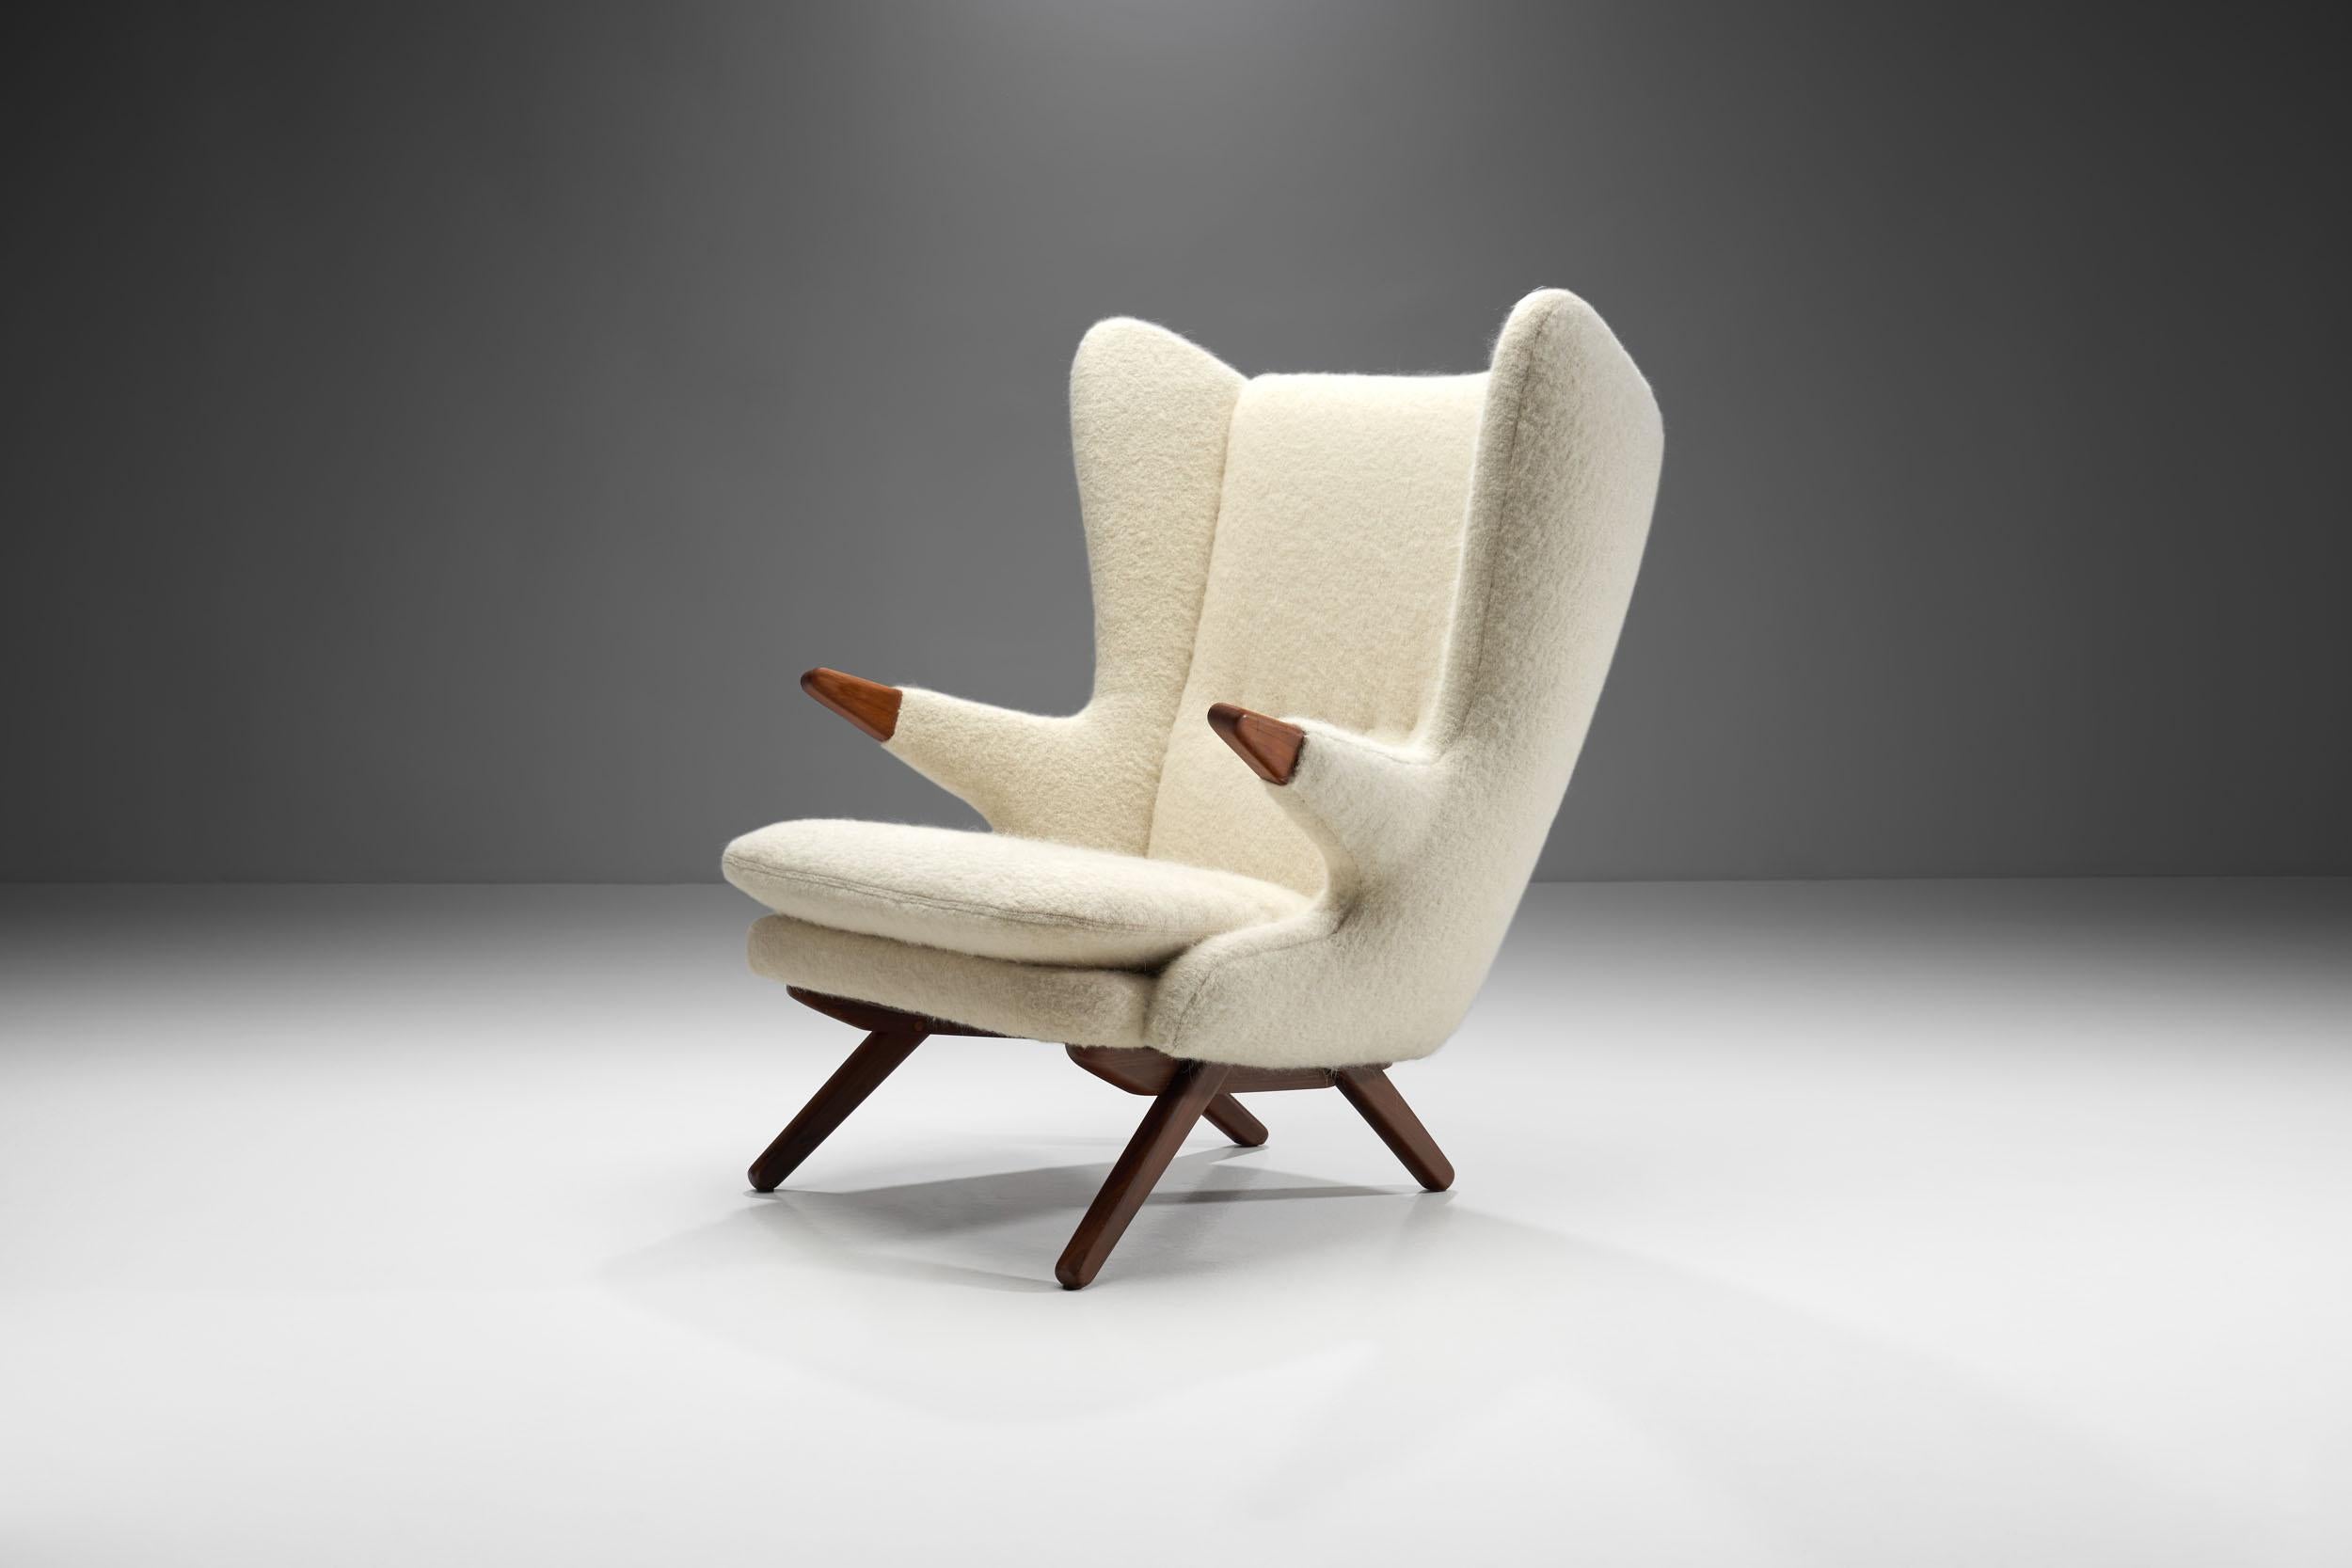 This chair is the most recognizable model of Danish designer and manufacturer, Svend Skipper, and a great example of the mid-century design era. Skipper only created commissioned pieces, meaning none of his designs were mass-produced. 

“Model 91”